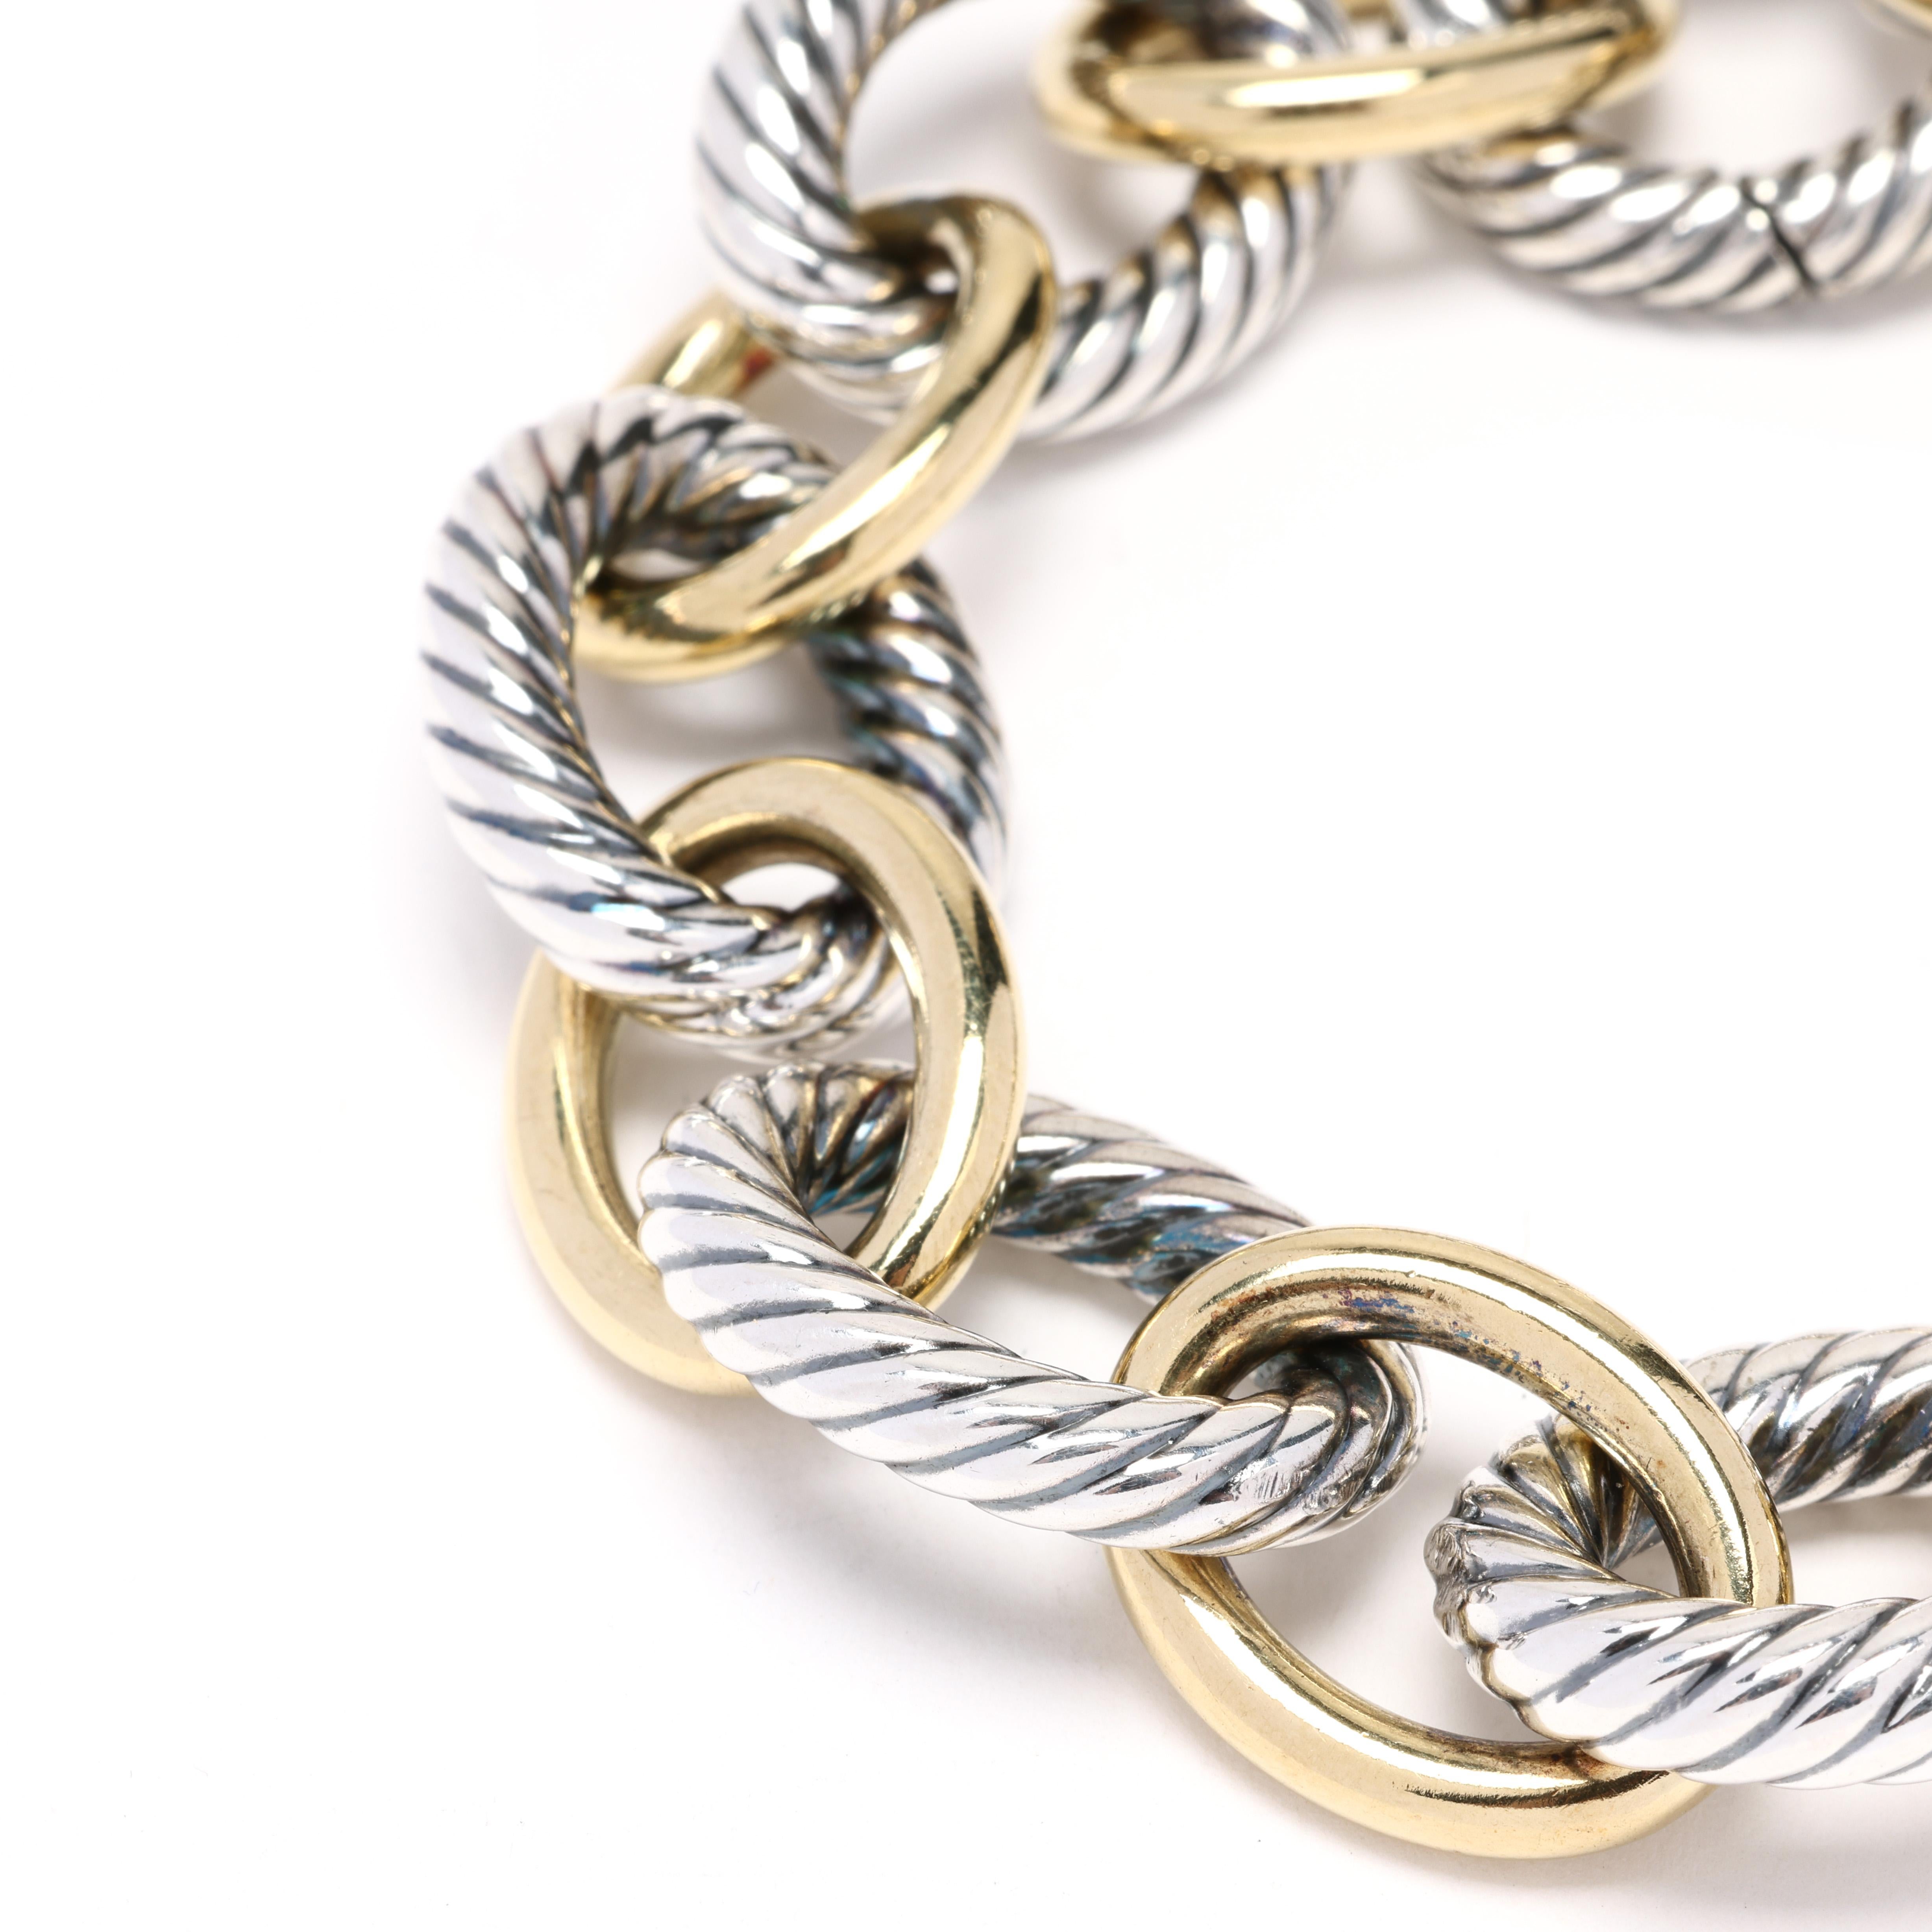 This David Yurman thick link bracelet is a stunning and bold statement piece. Made from 18k yellow gold and sterling silver, this bracelet features a thick and textured link design that is sure to catch everyone's attention. The combination of 18k